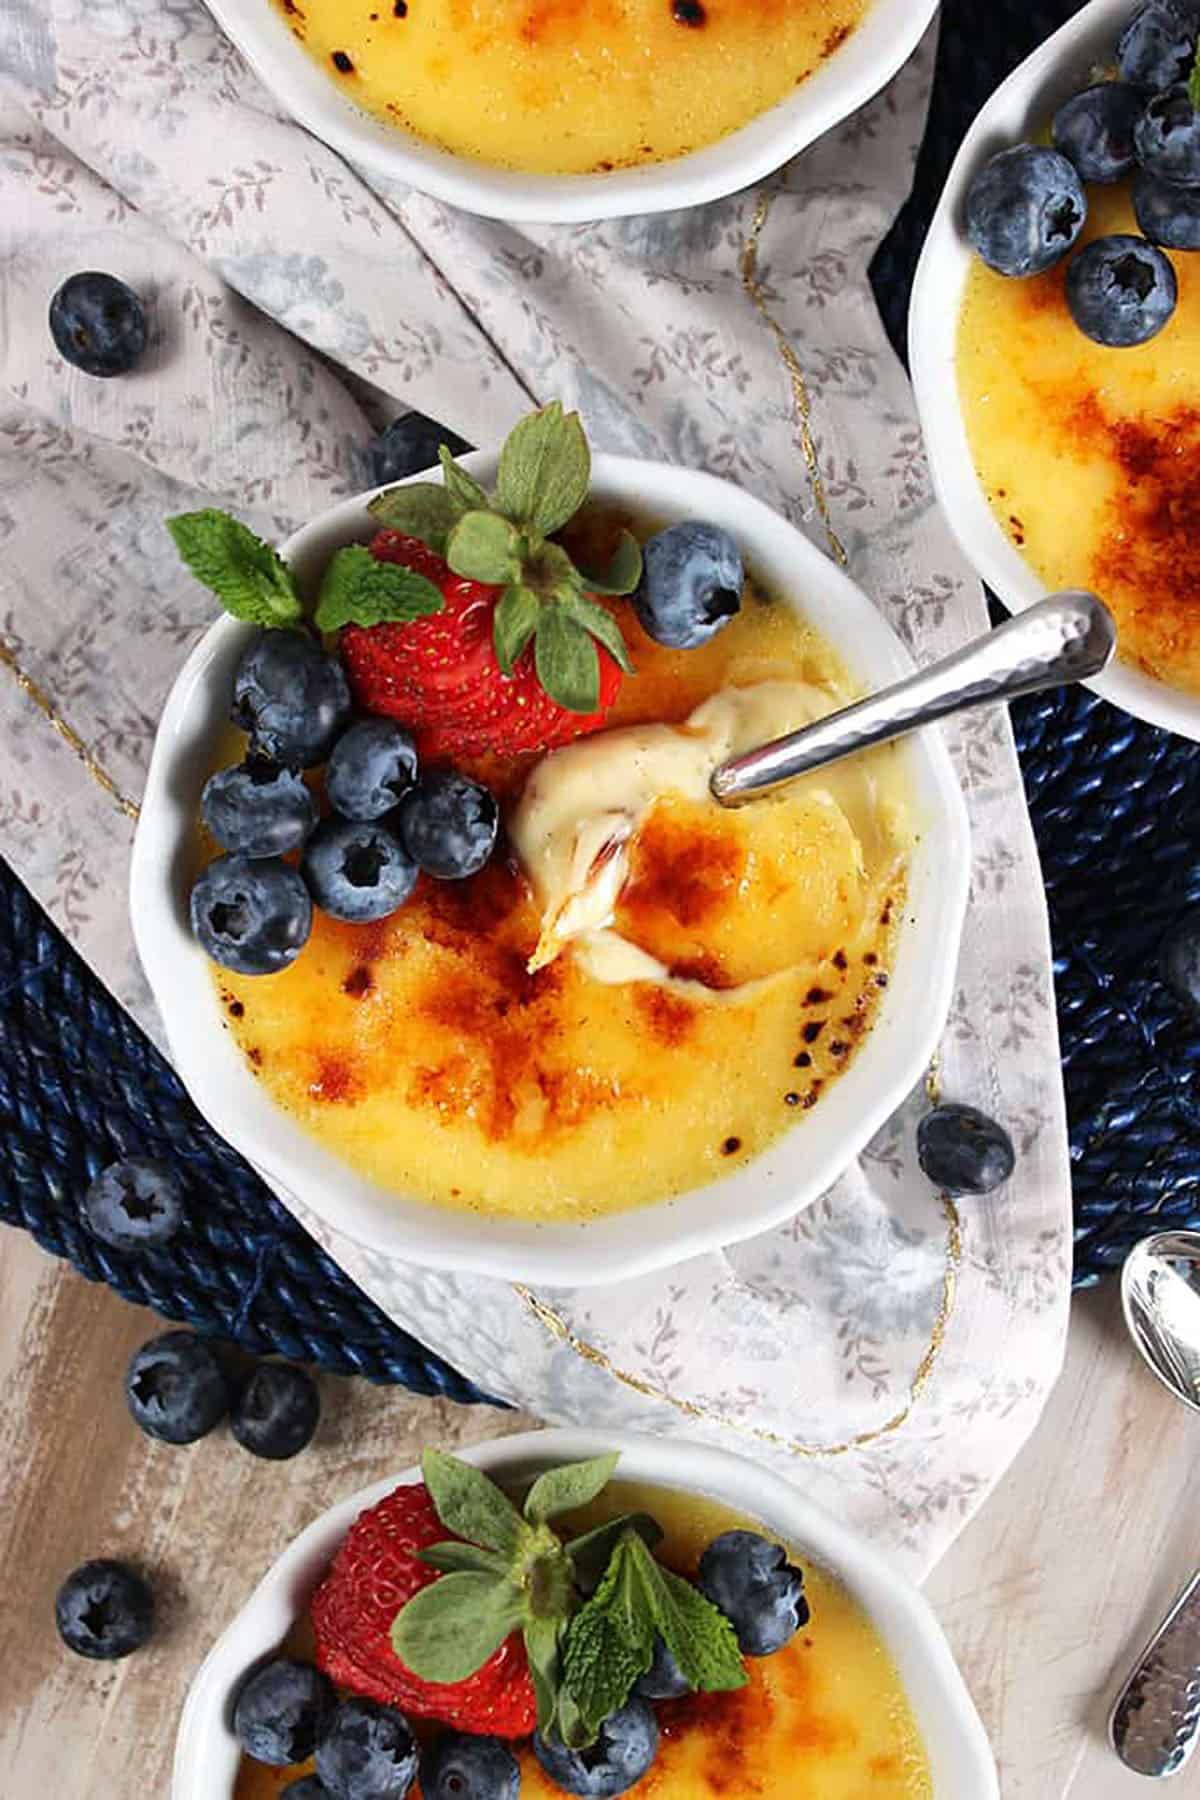 Creme Brûlée in a round white dish on a floral napkin with a spoon in it.